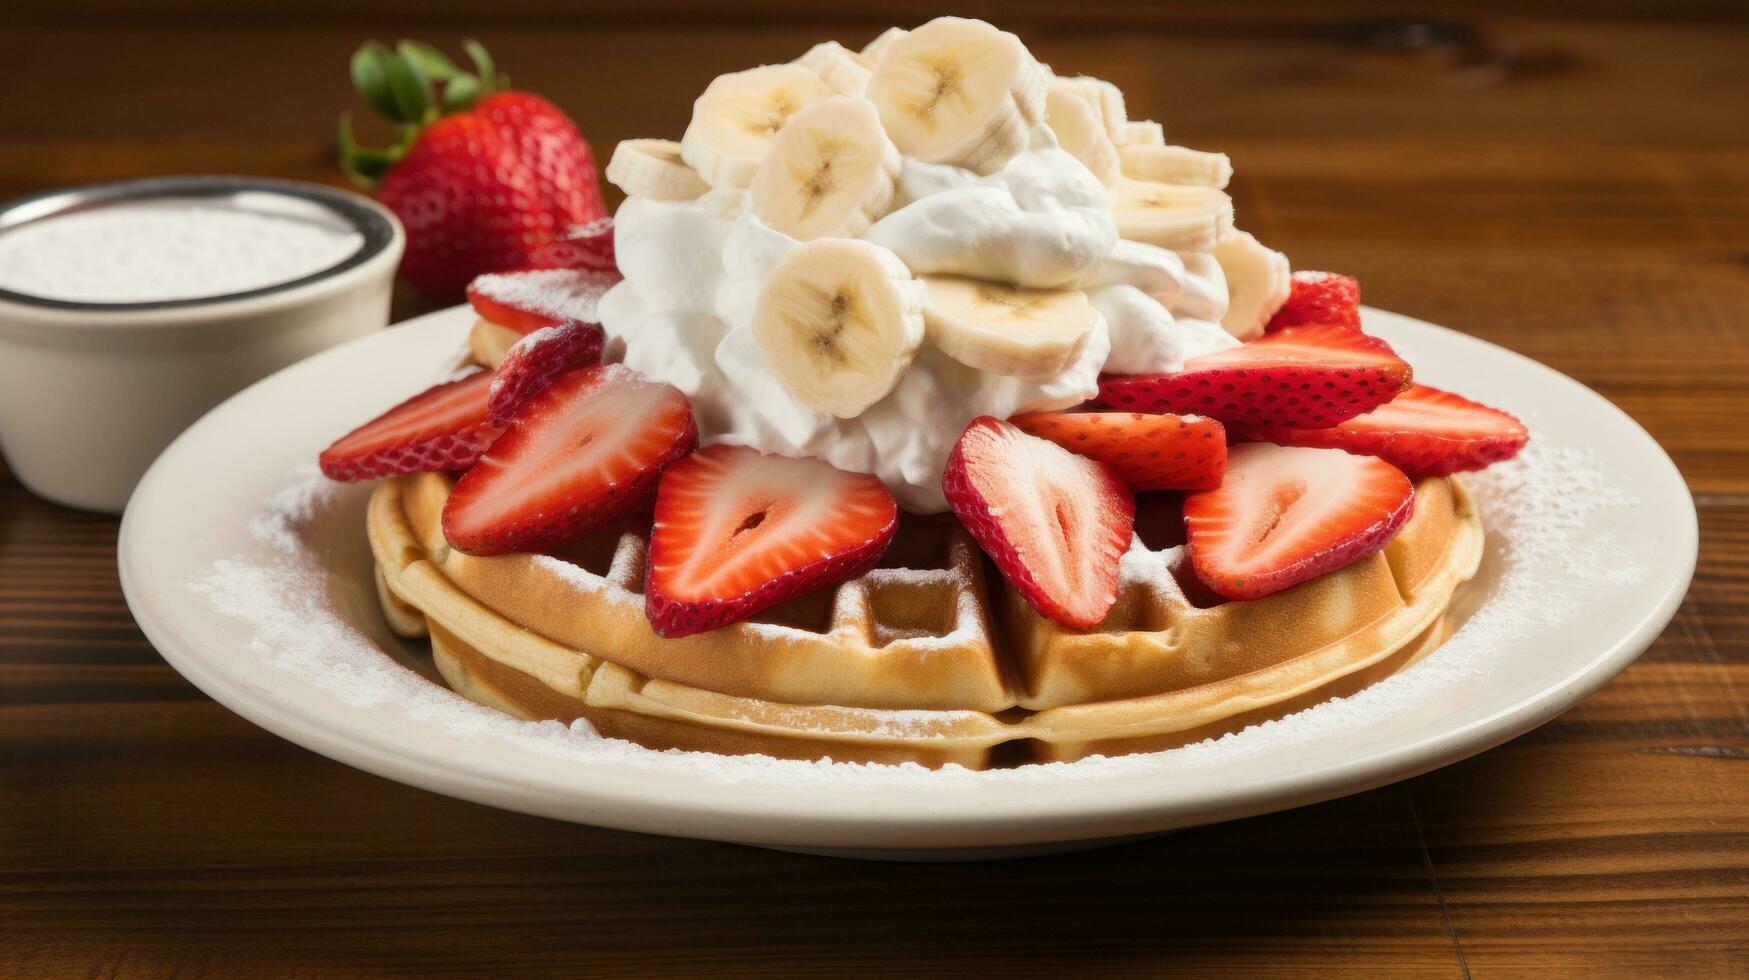 Waffles with fresh strawberries, bananas, and a generous amount of whipped cream photo